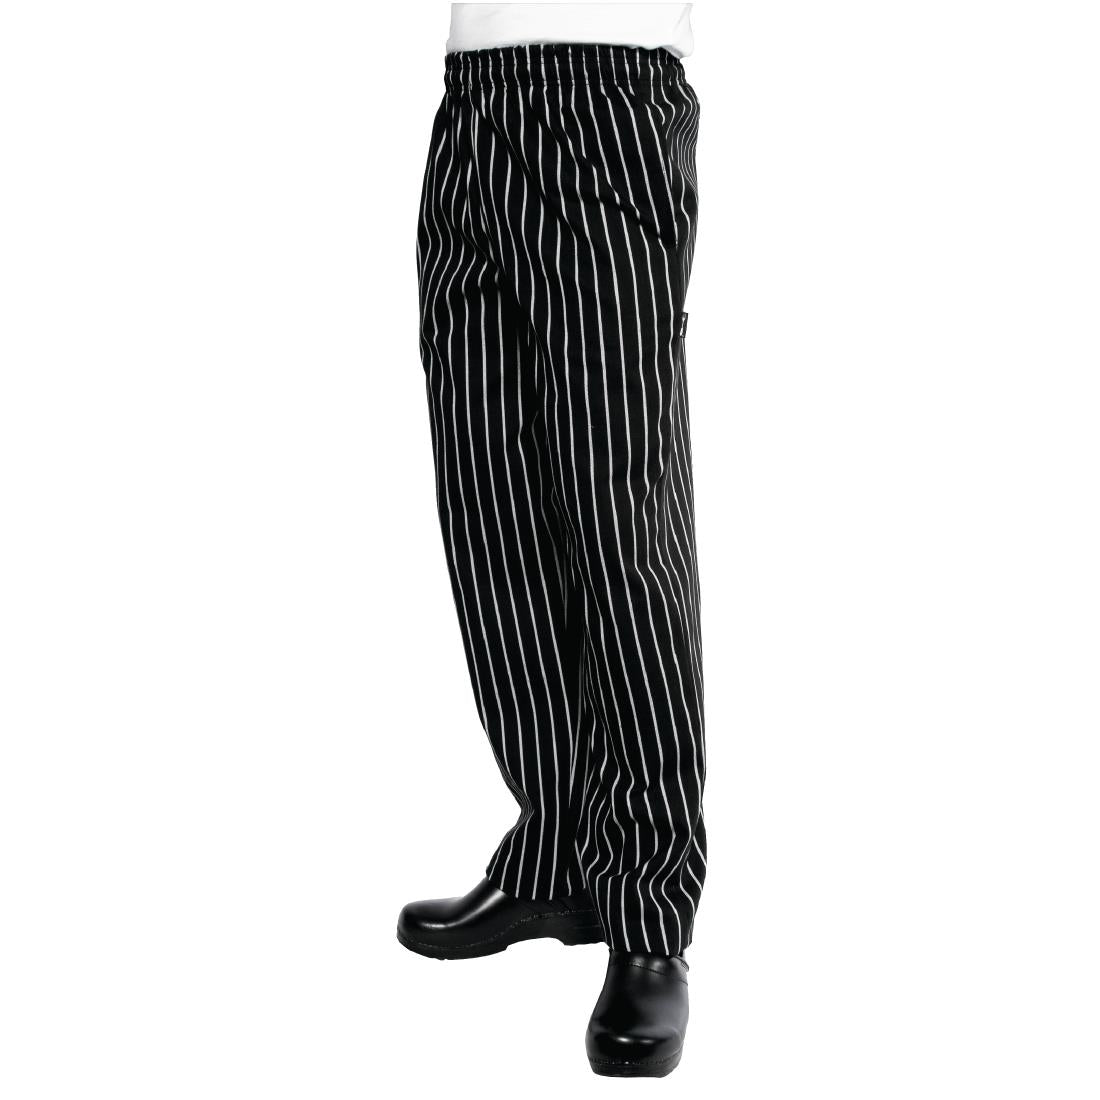 A940-3XL Chef Works Designer Baggy Pant Chalk Stripe 3XL JD Catering Equipment Solutions Ltd